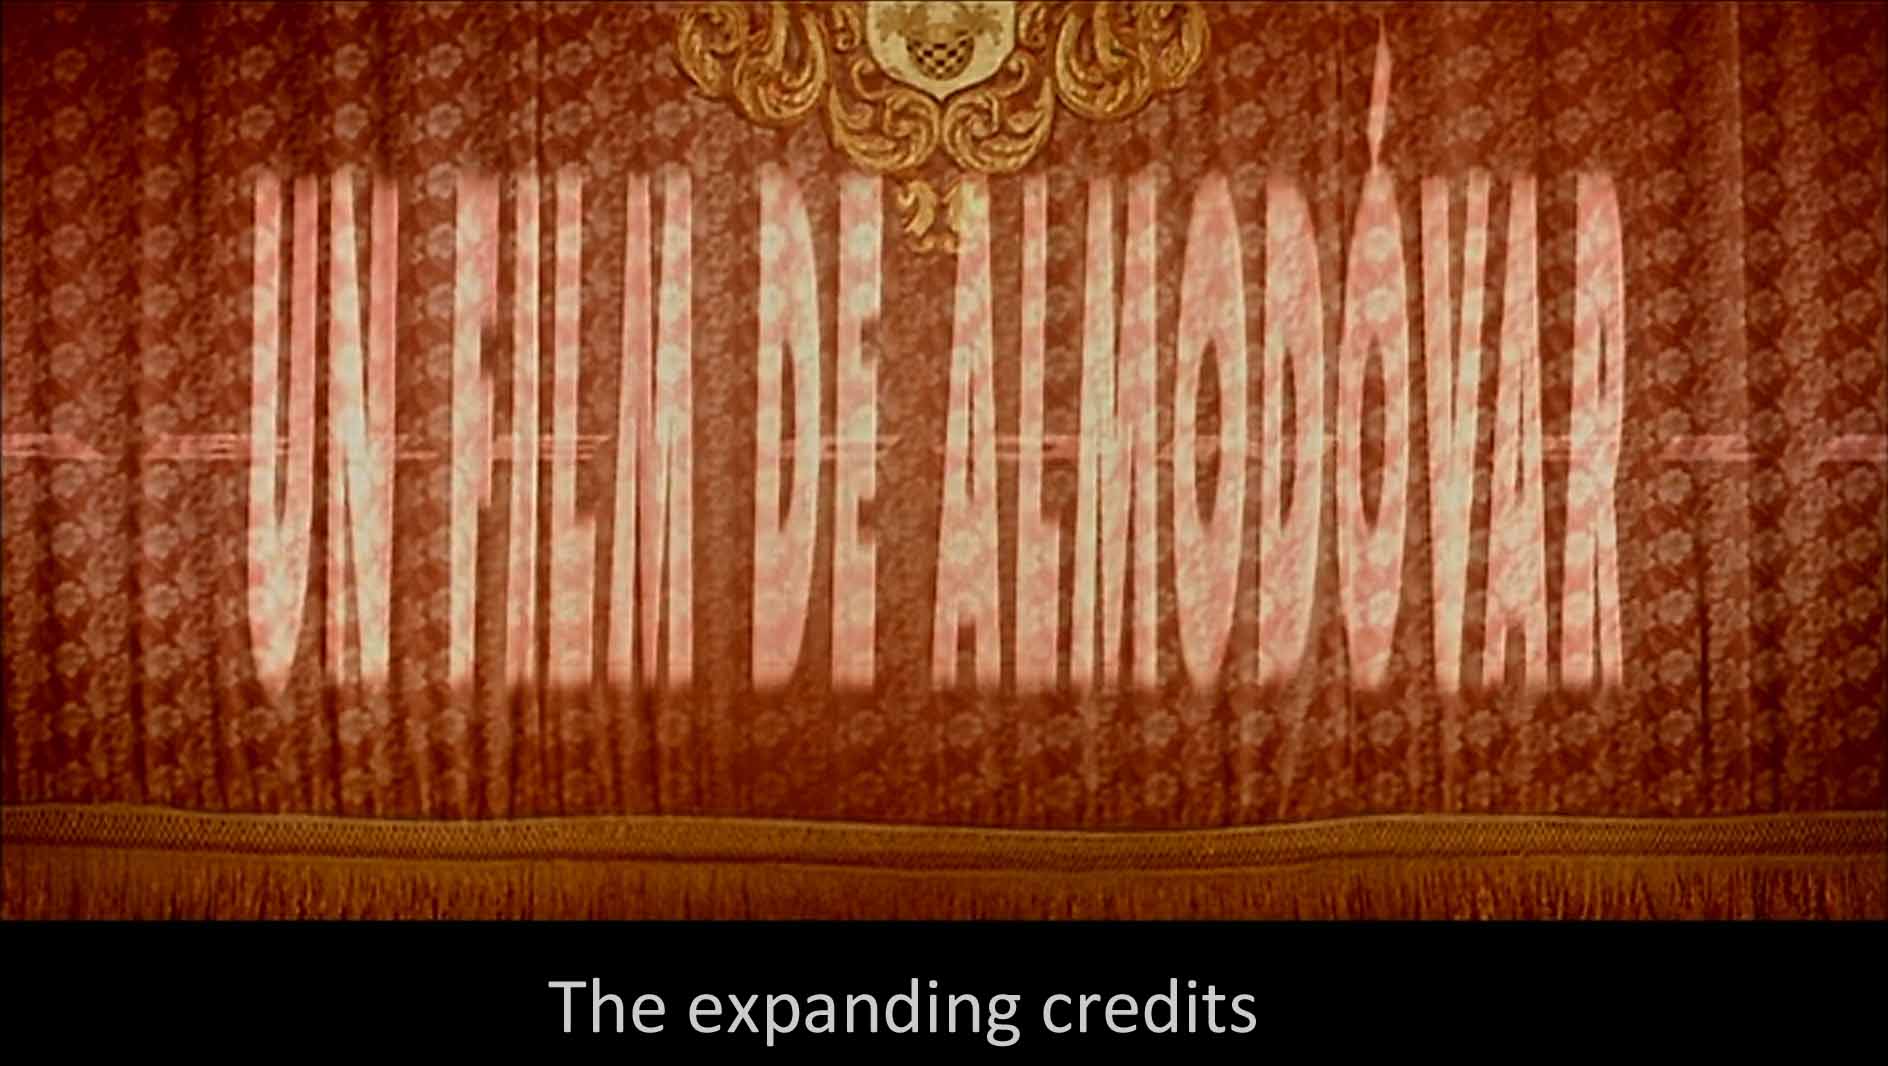 The expanding credits